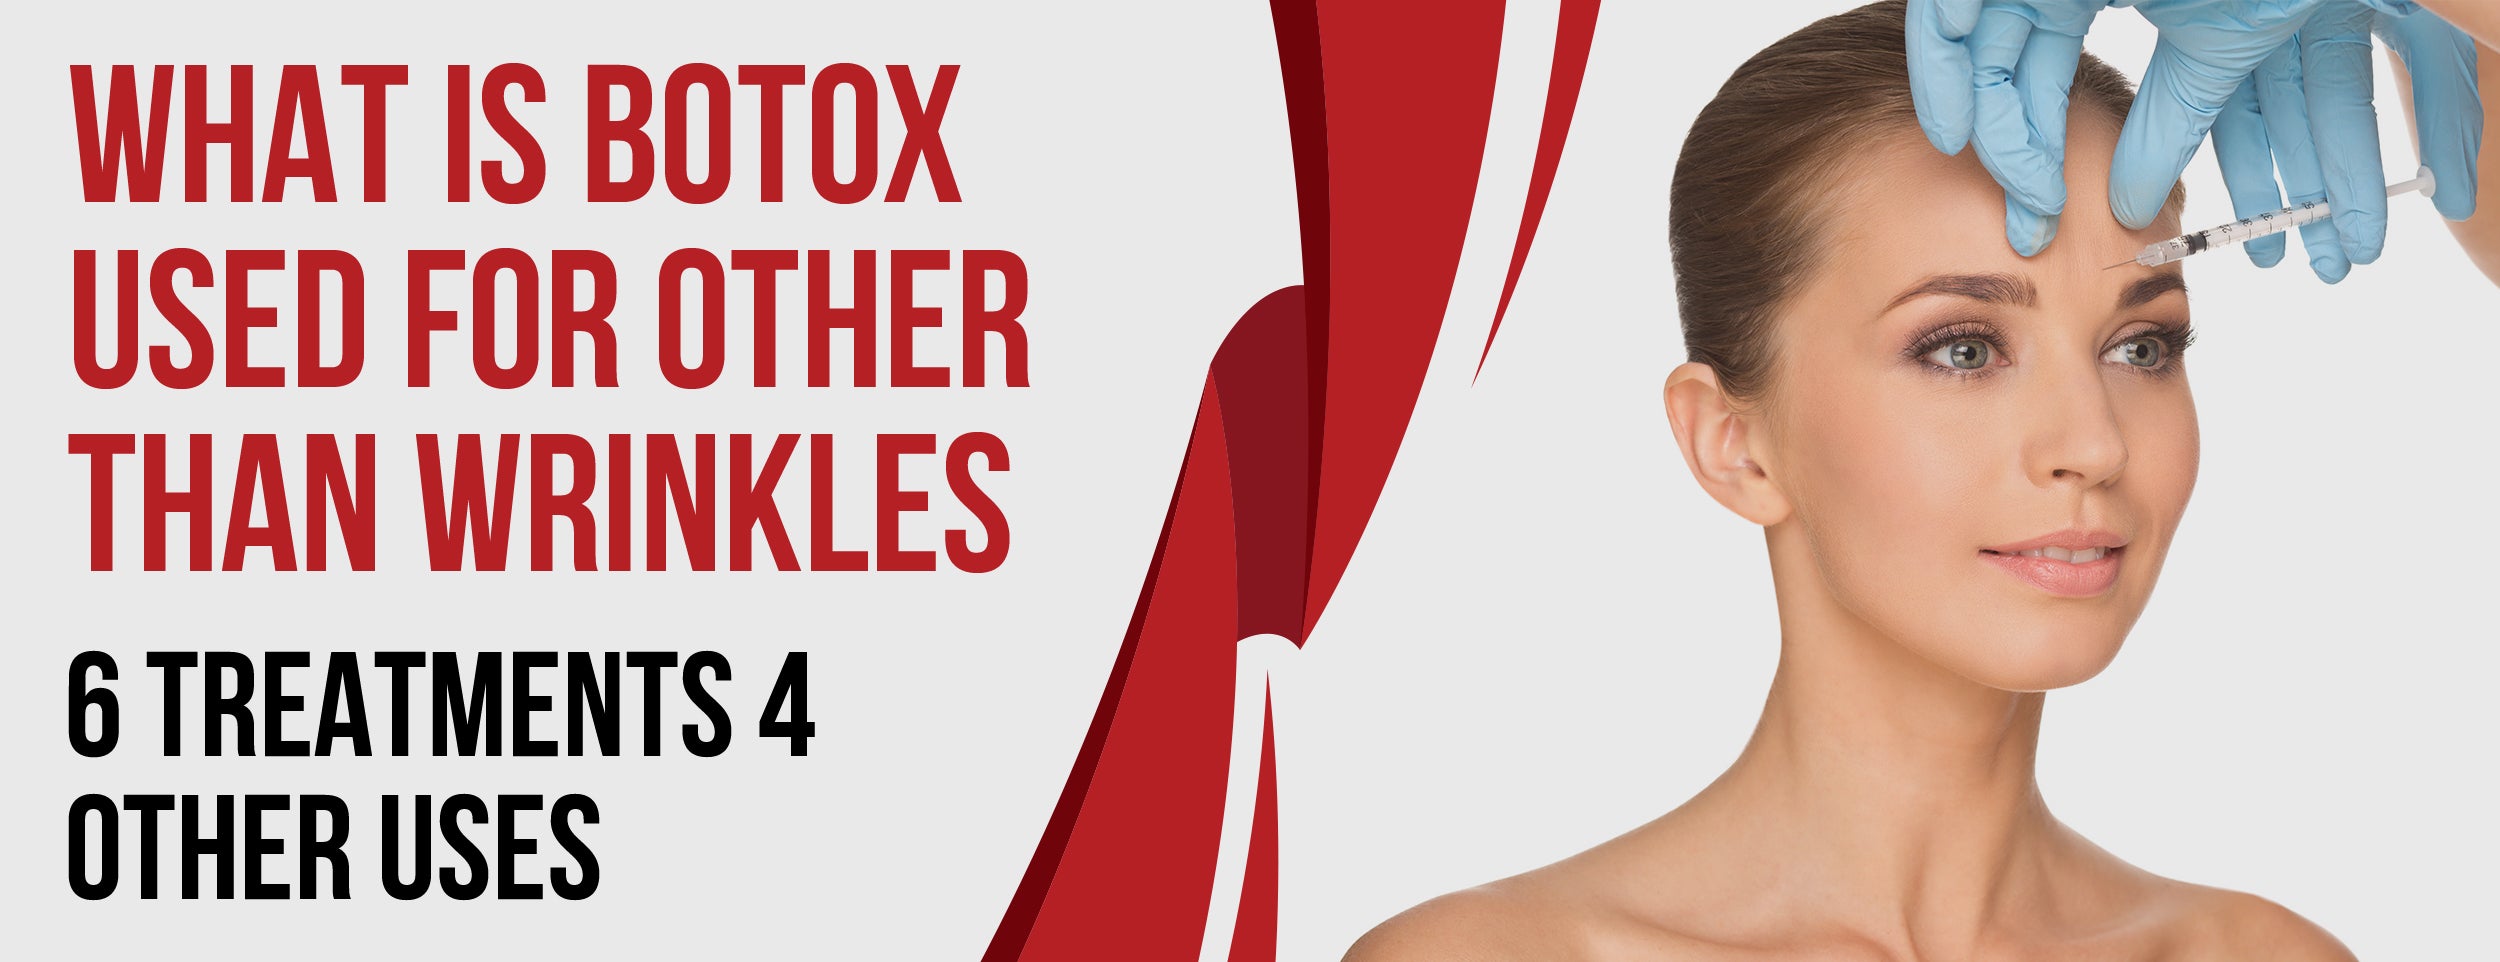 5 FDA-approved Botox treatments & 4 other uses beyond wrinkles